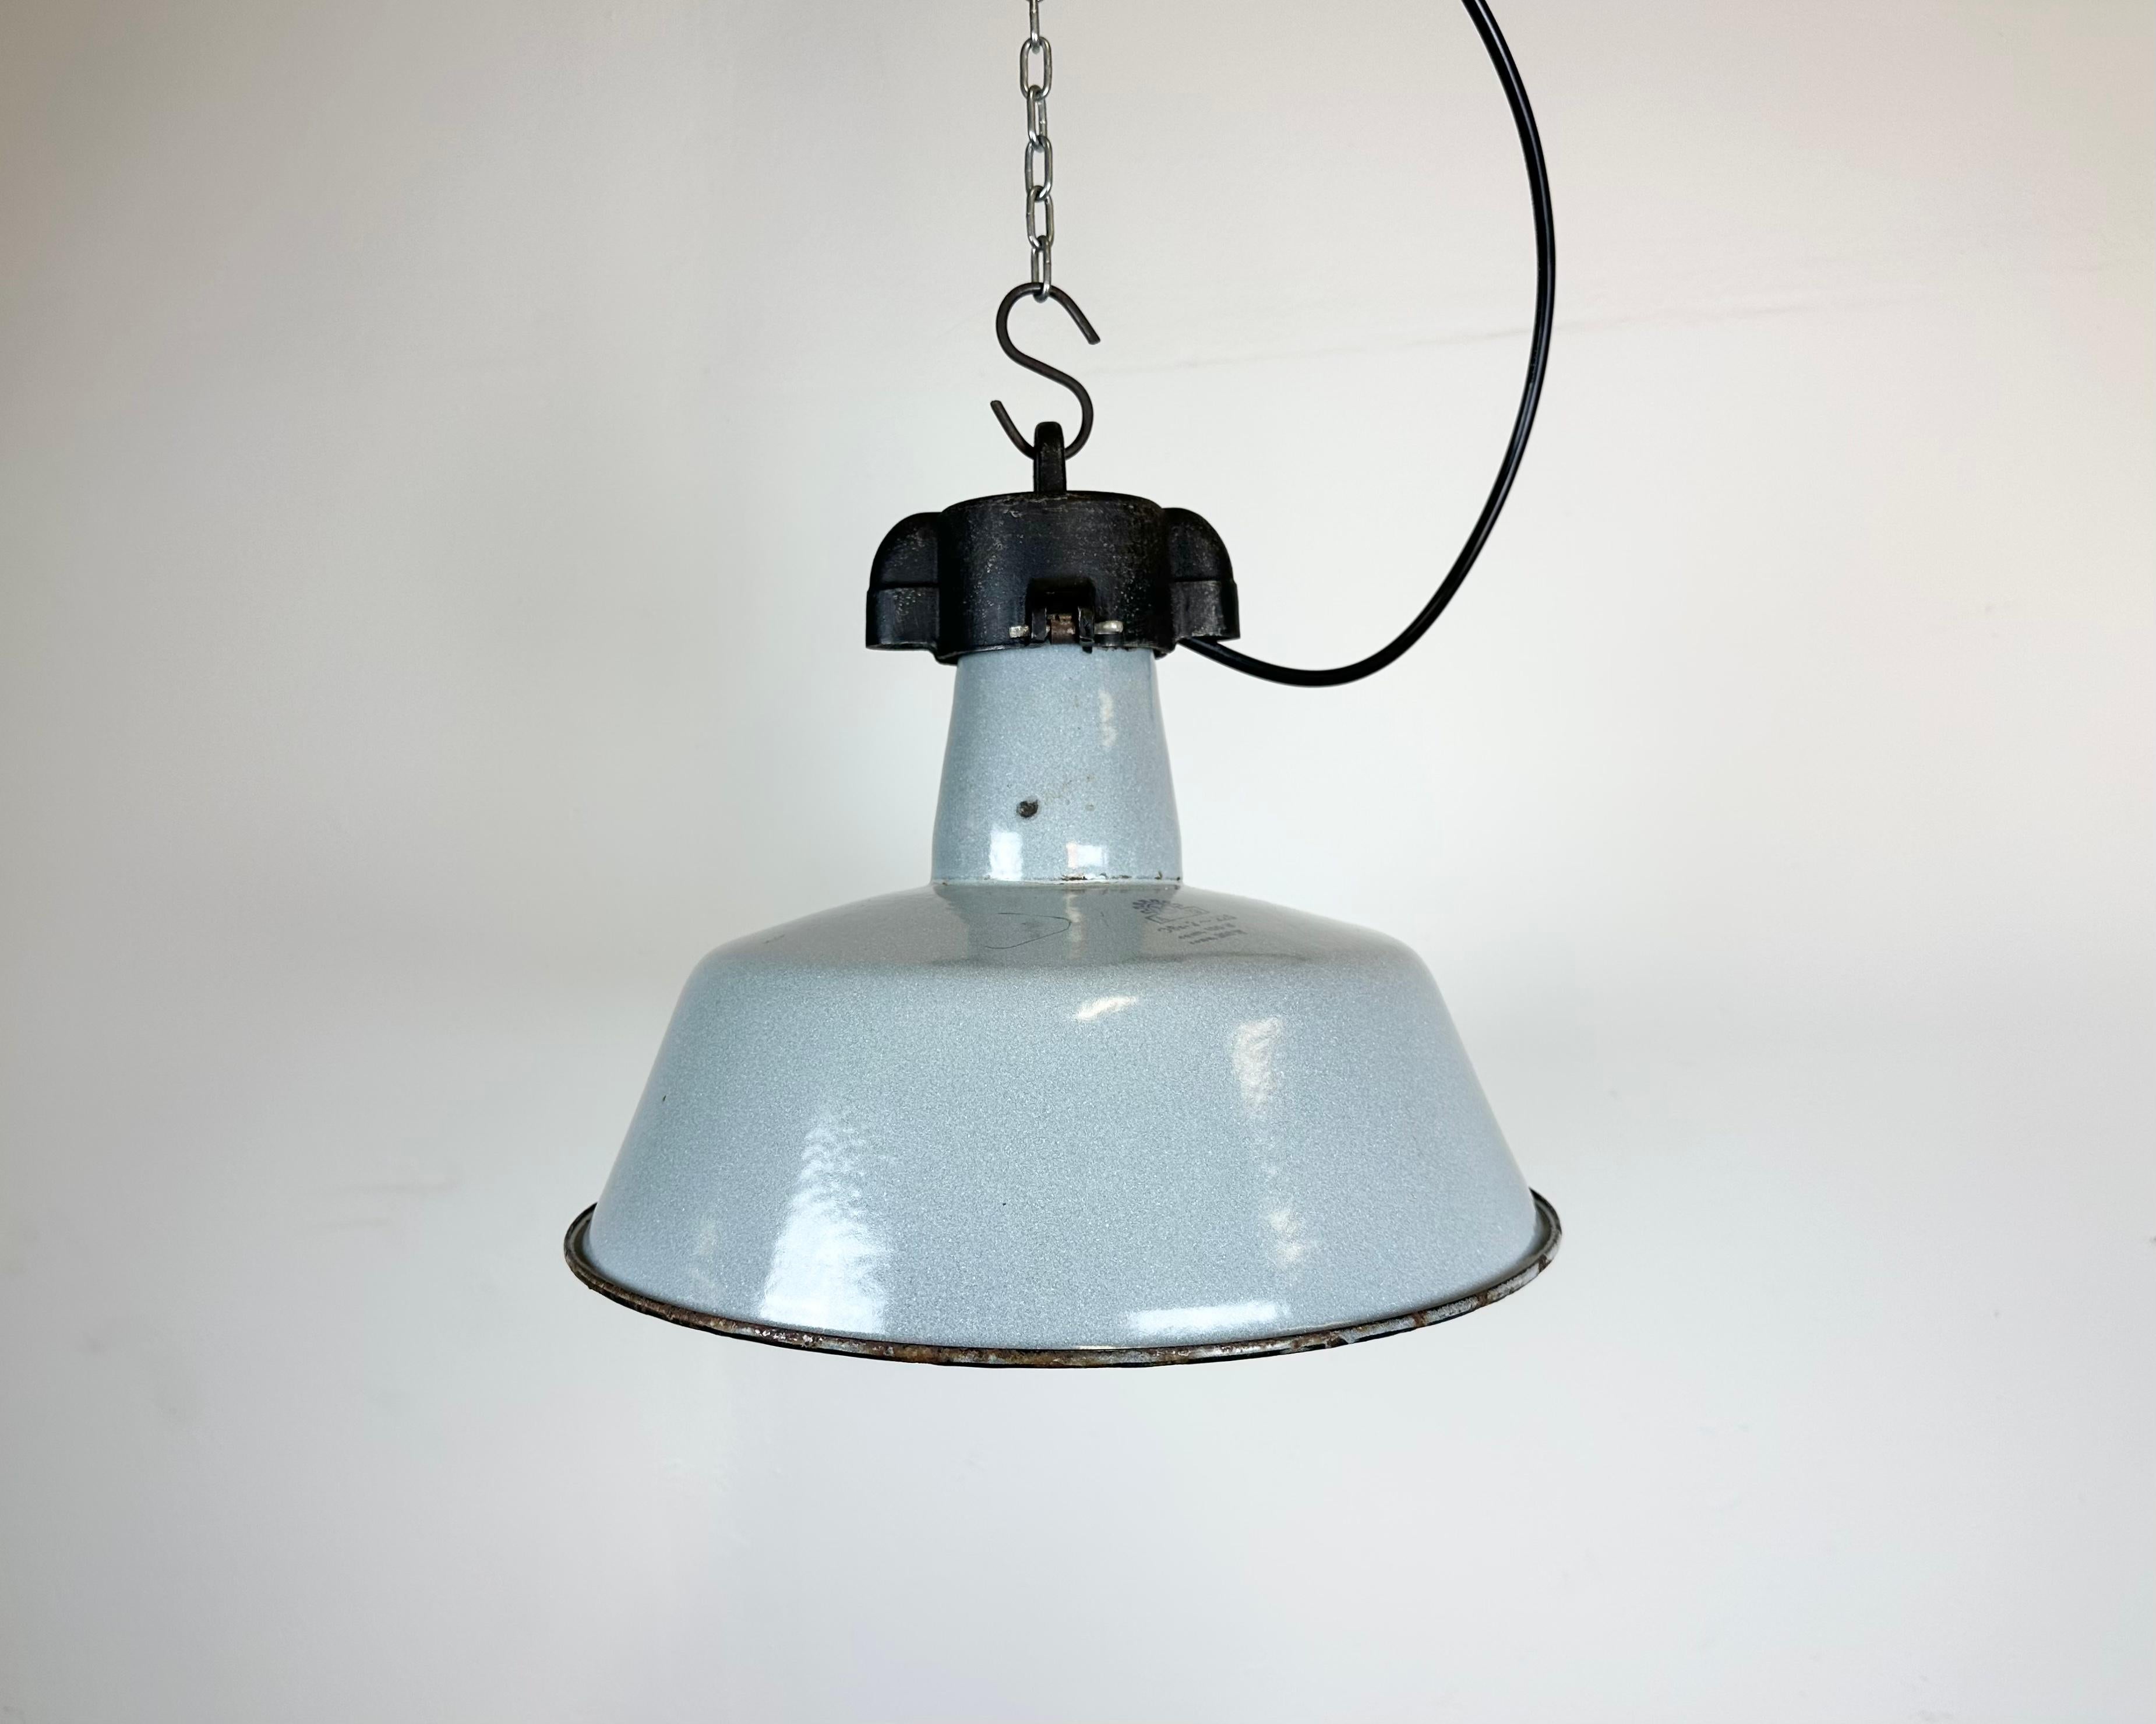 Industrial grey enamel pendant light made by Polam Wilkasy in Poland during the 1960s. White enamel inside the shade. Cast iron top. The porcelain socket requires E 27/ E 26 light bulbs. New wire. Fully functional. The weight of the lamp is 2 kg.